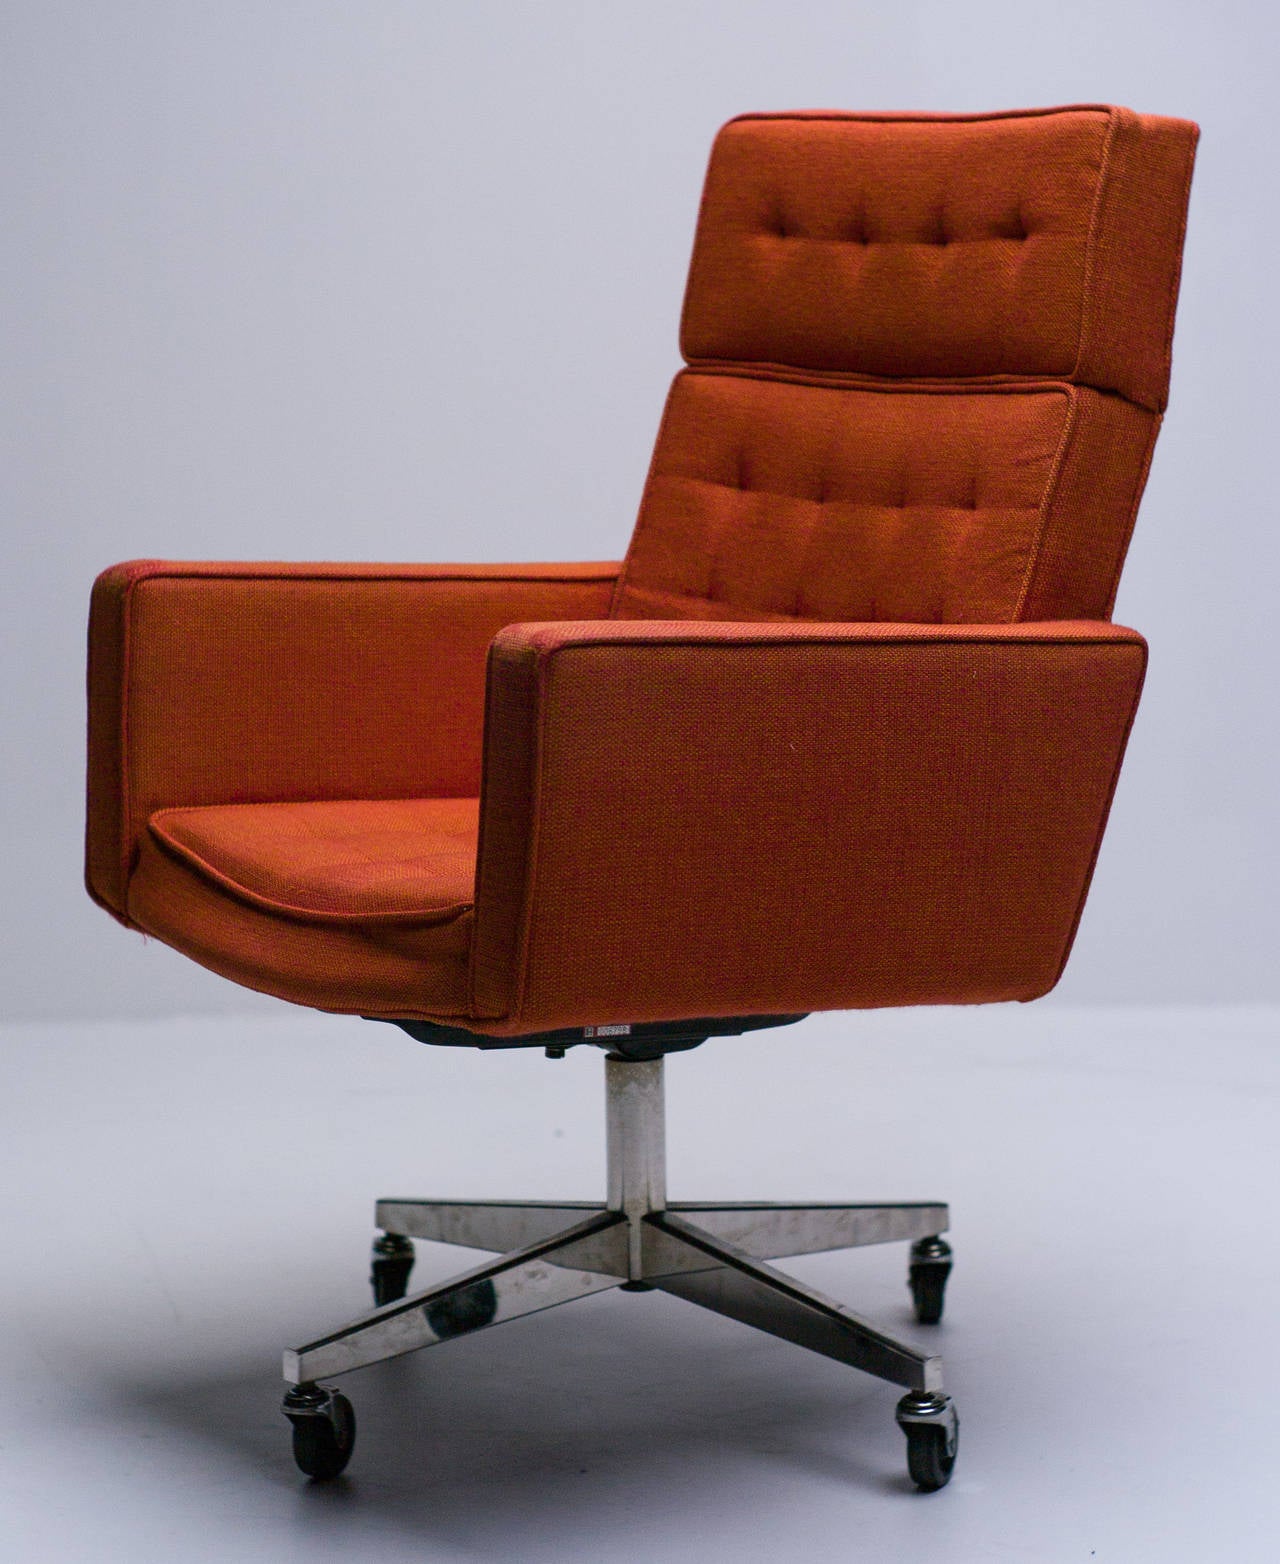 Very comfortable desk chair with the original 2-tone wool upholstery in good vintage condition.